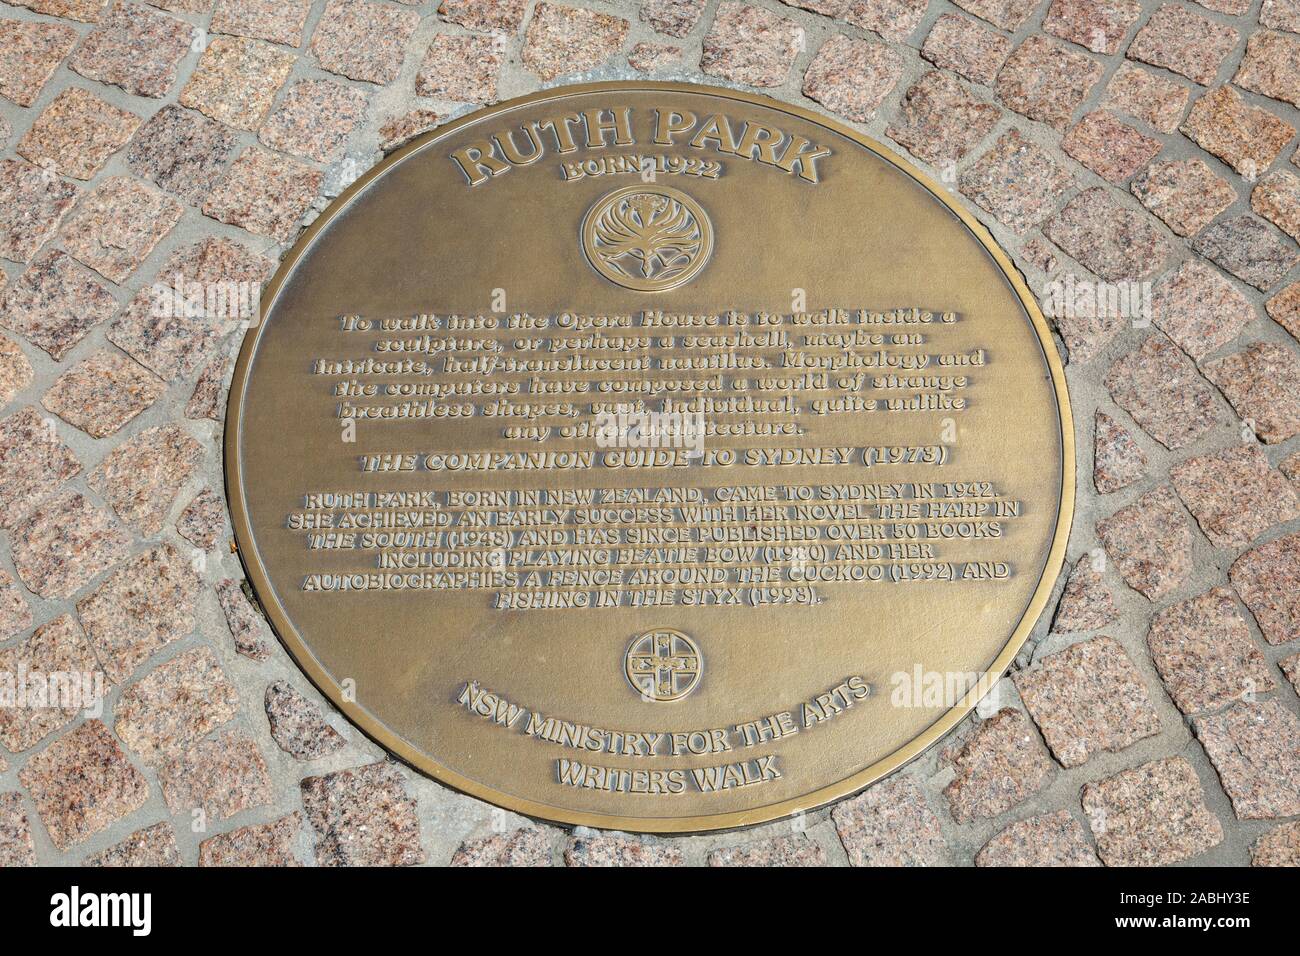 The plaque to the author Ruth Park, one of the 60 authors commemorated in the Sydney Writers Walk, Sydney, Australia Stock Photo